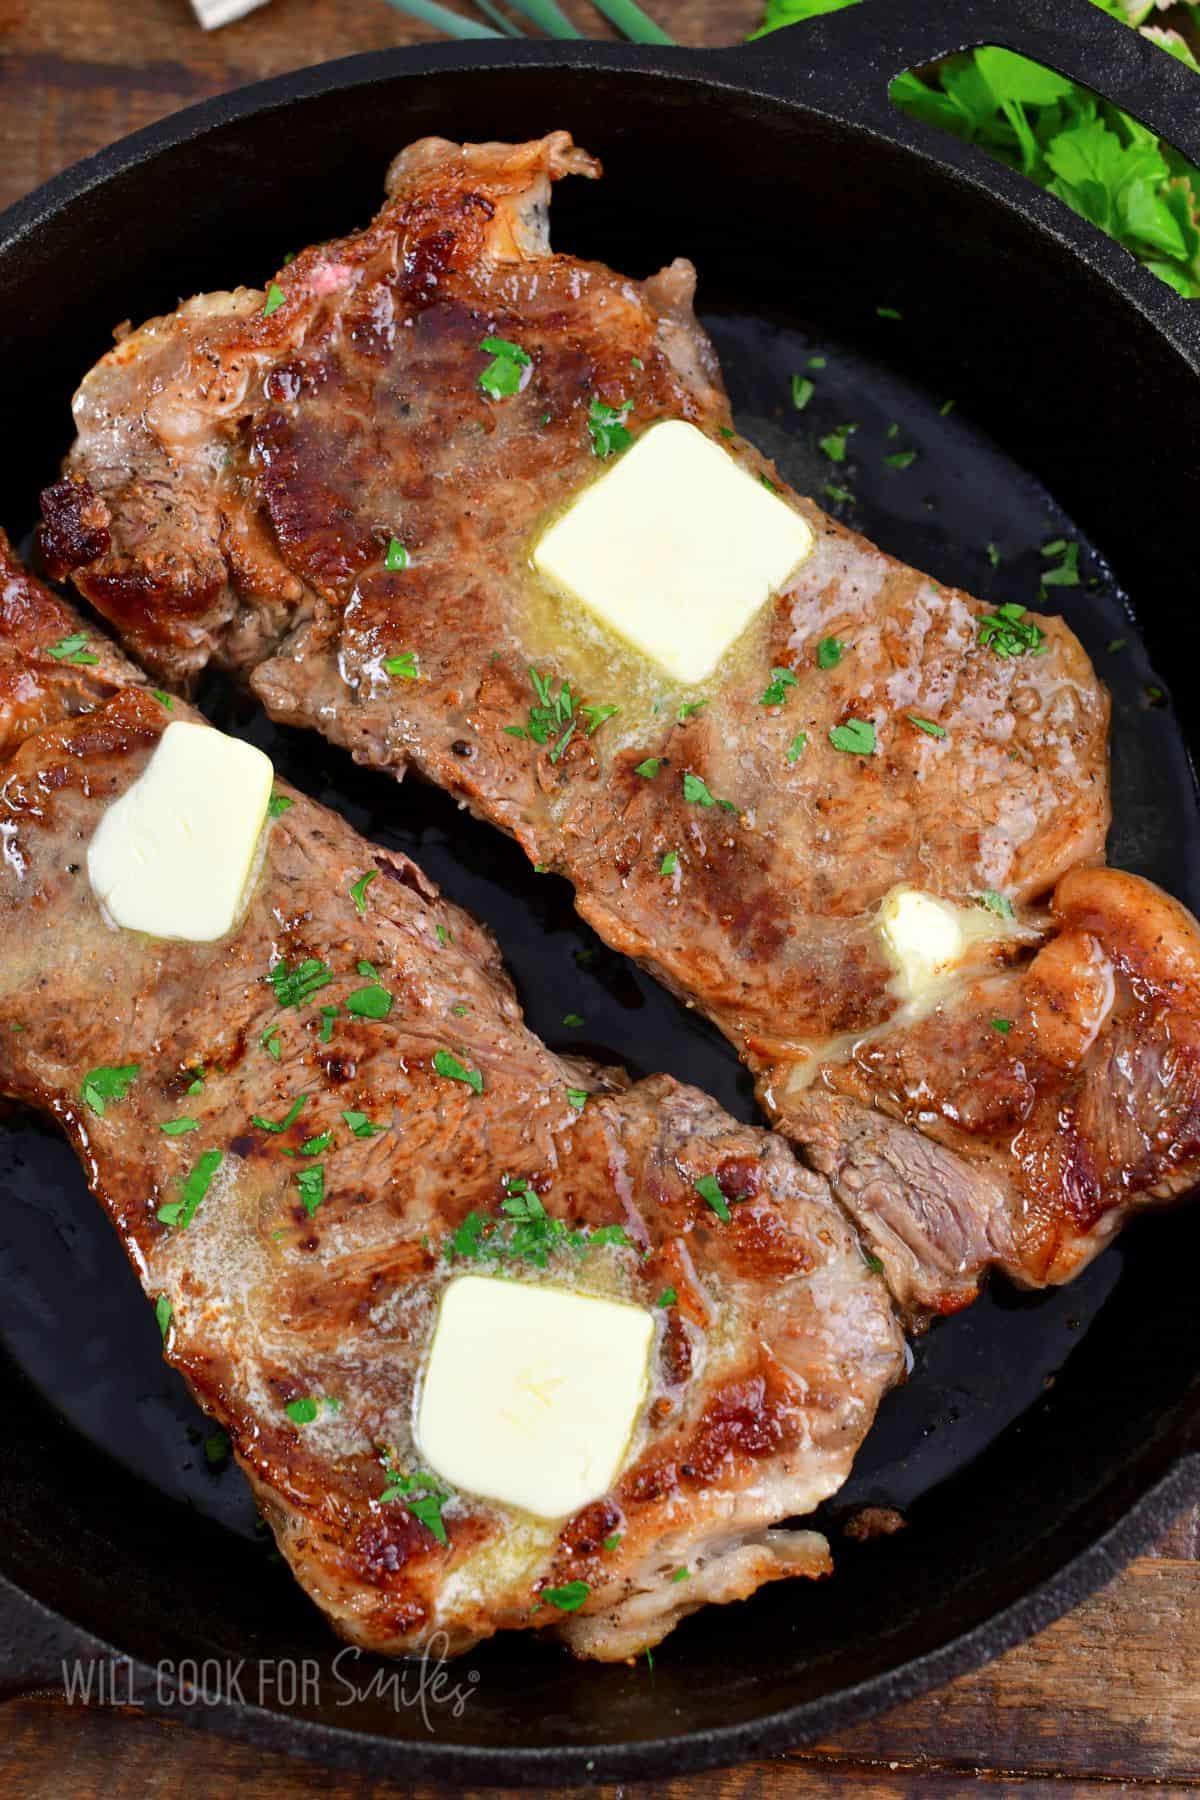 https://www.willcookforsmiles.com/wp-content/uploads/2023/03/How-To-Cook-Steak-In-The-Oven-top-view.jpg